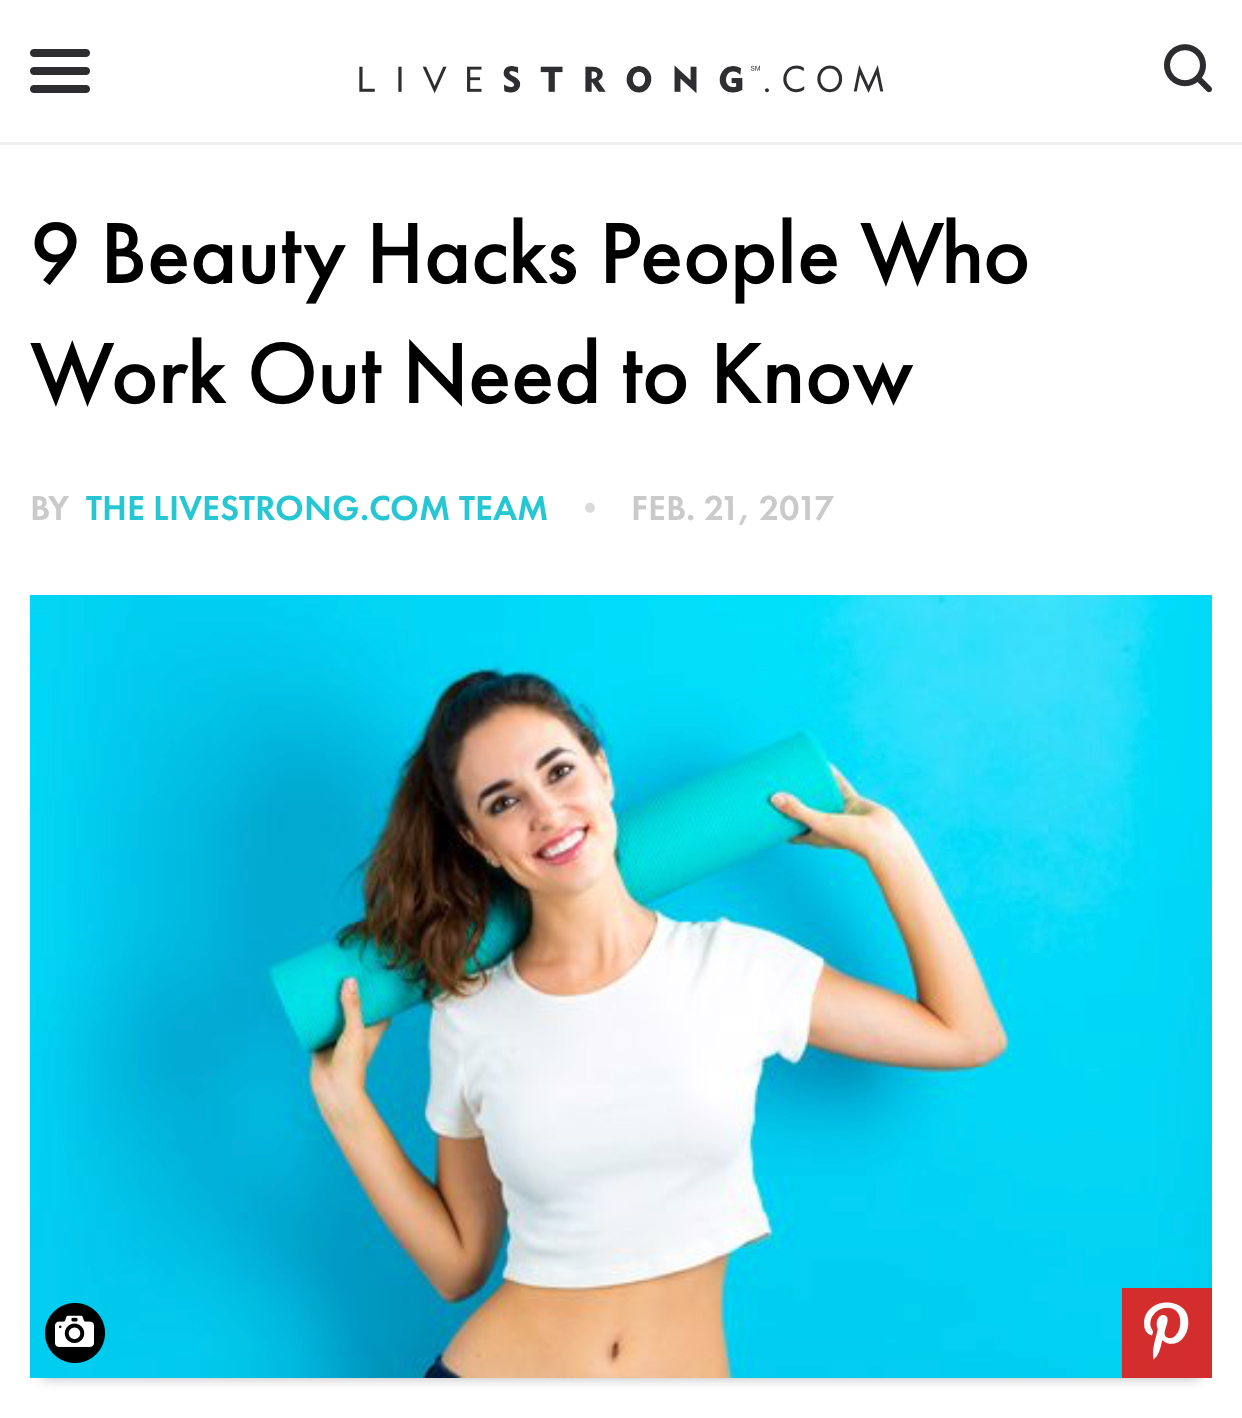 Livestrong.com: "9 Beauty Hacks People Who Work Out Need To Know"